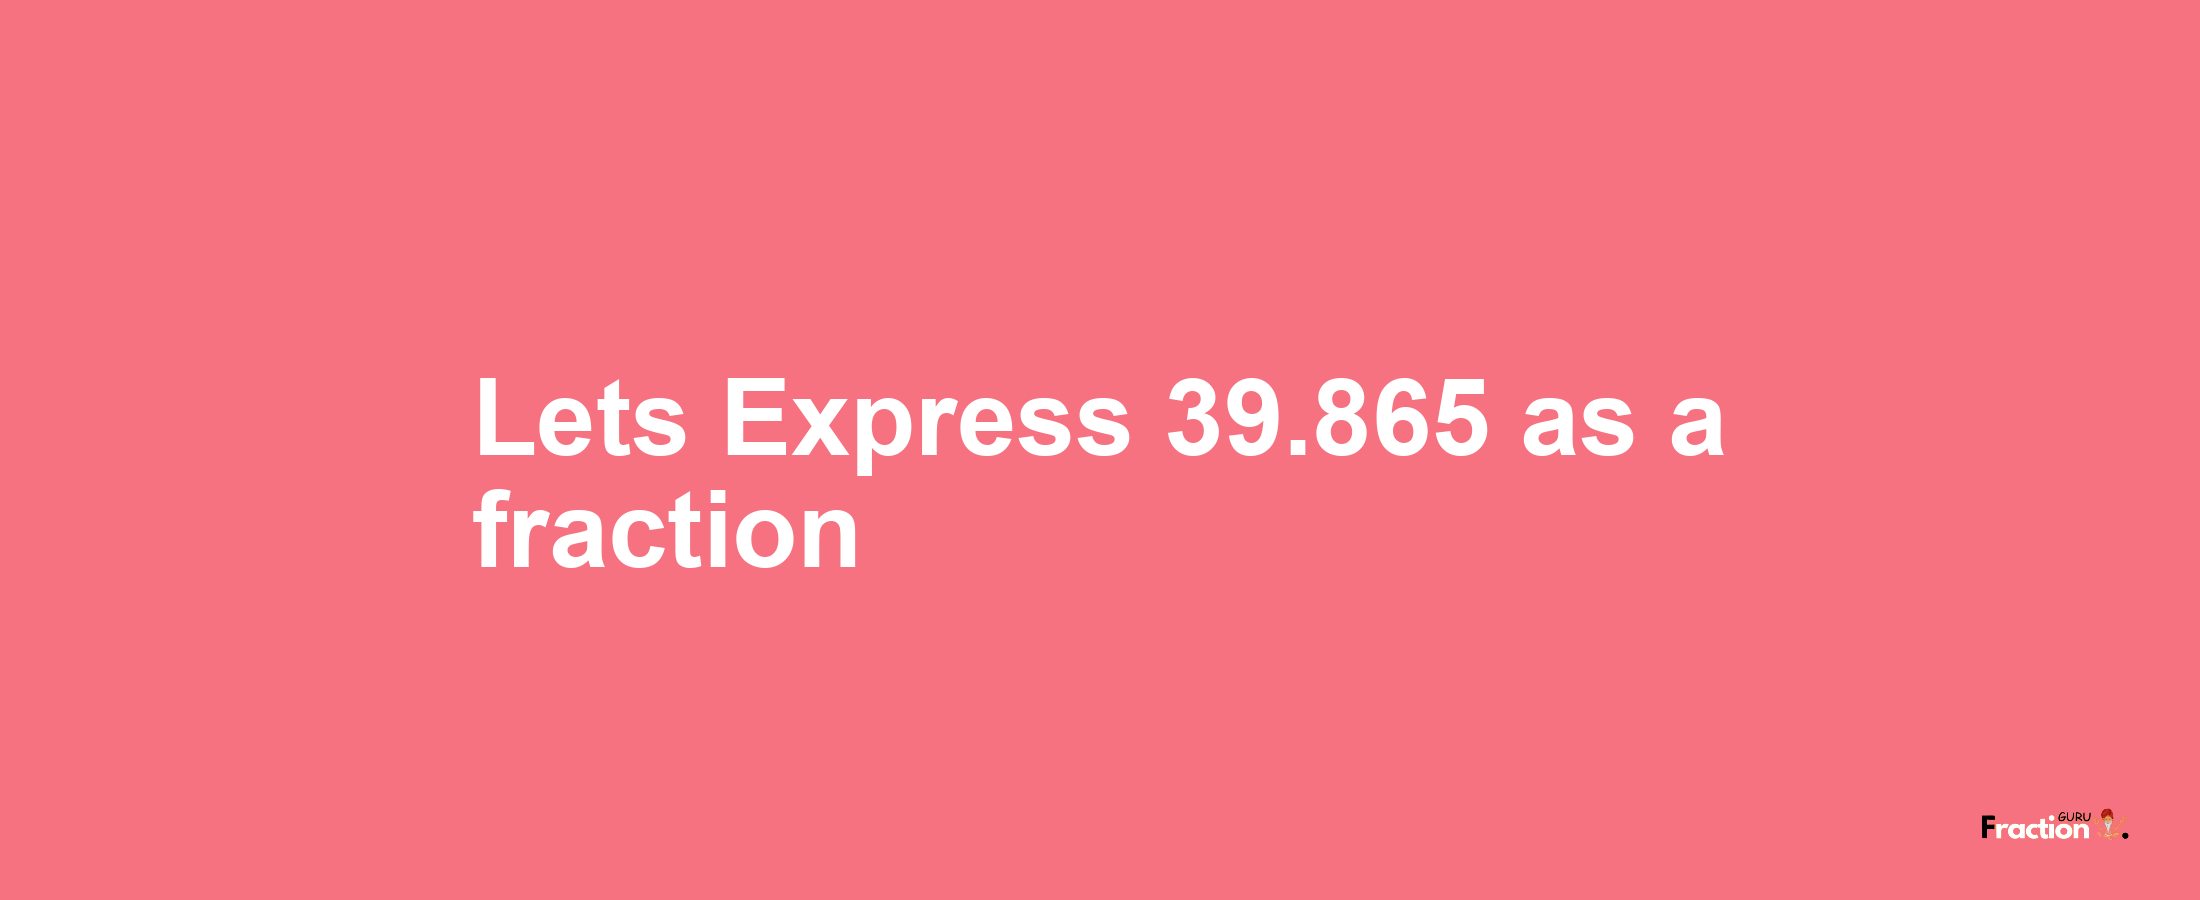 Lets Express 39.865 as afraction